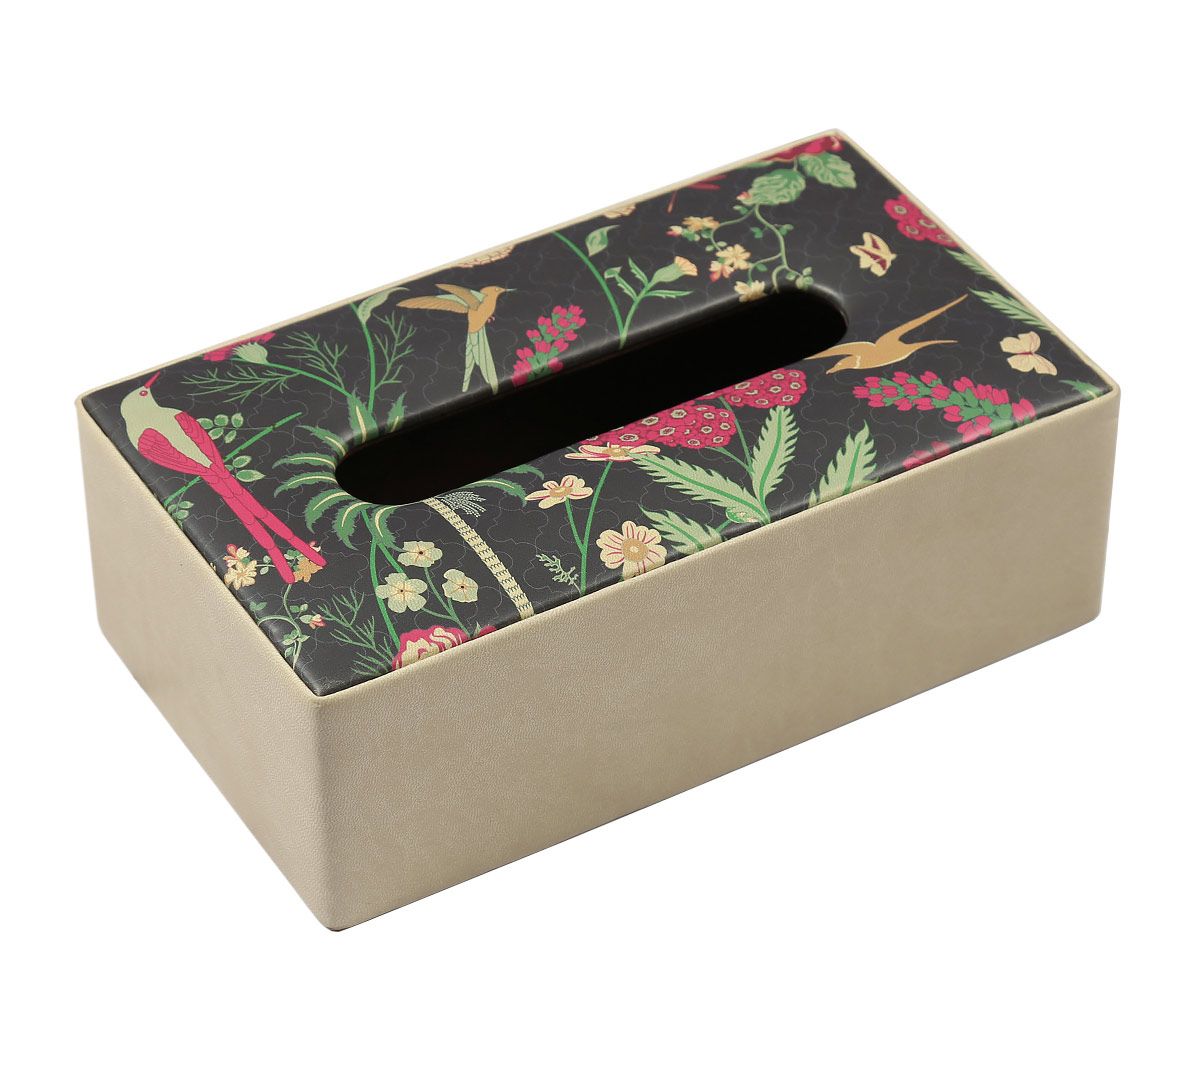 India Circus Floral Galore Leather Tissue Box Holder